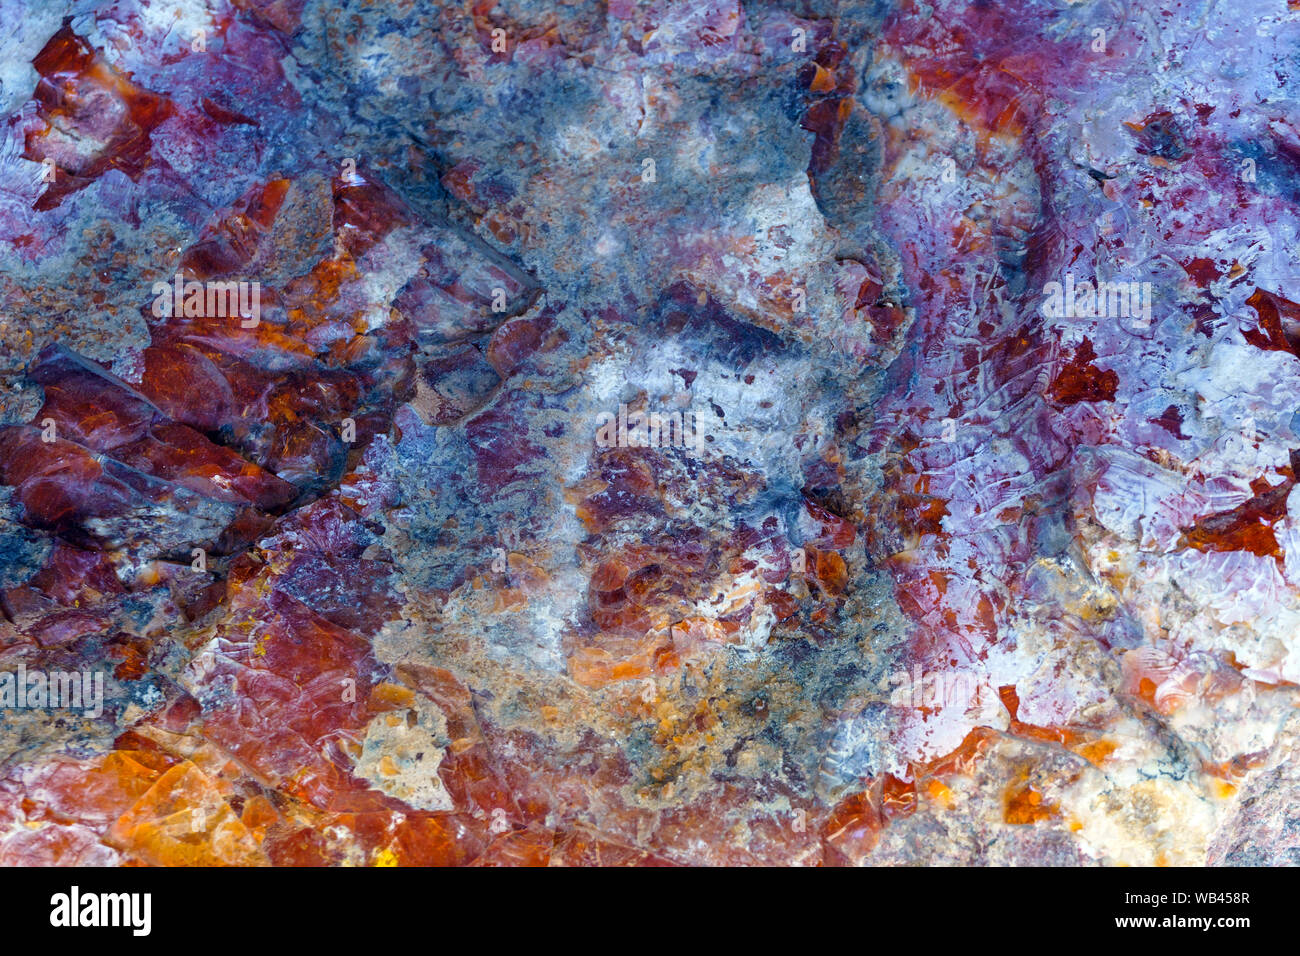 background, texture - blue-red crystalline colored natural stone surface Stock Photo